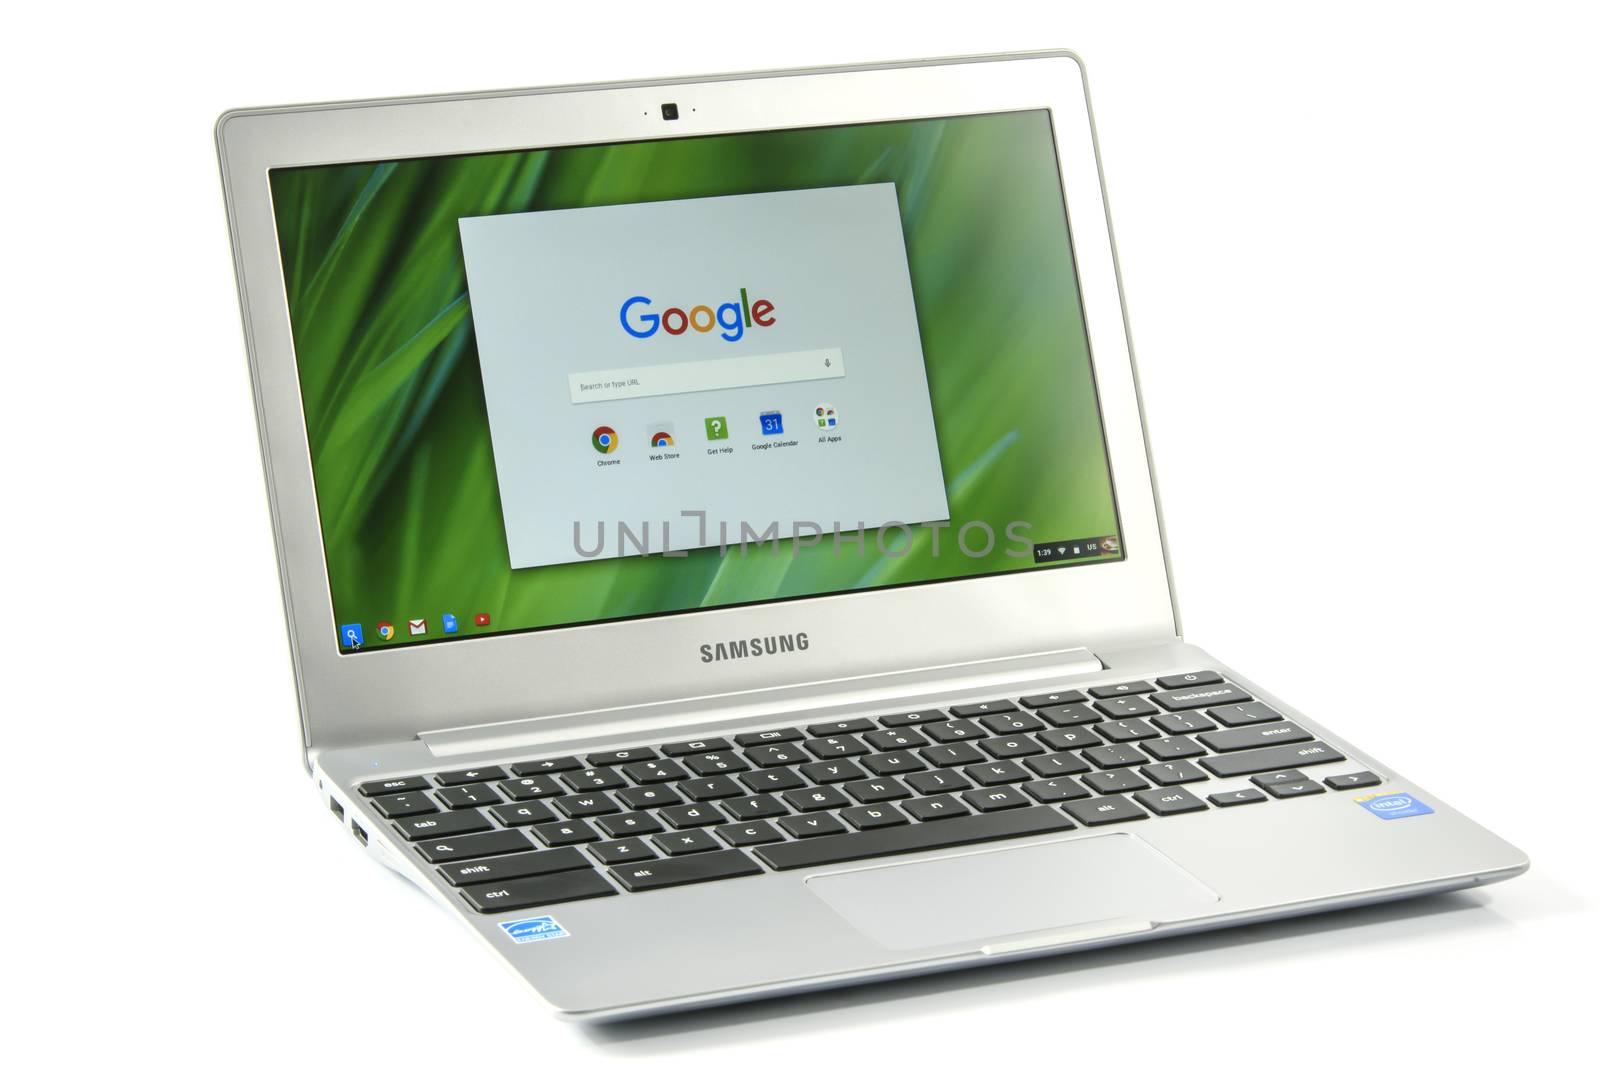 Krynica Poland - June 17. 2016: Notebook Samsung Chromebook 2 11.6" model XE500C12-K01US isolated on white background in studio